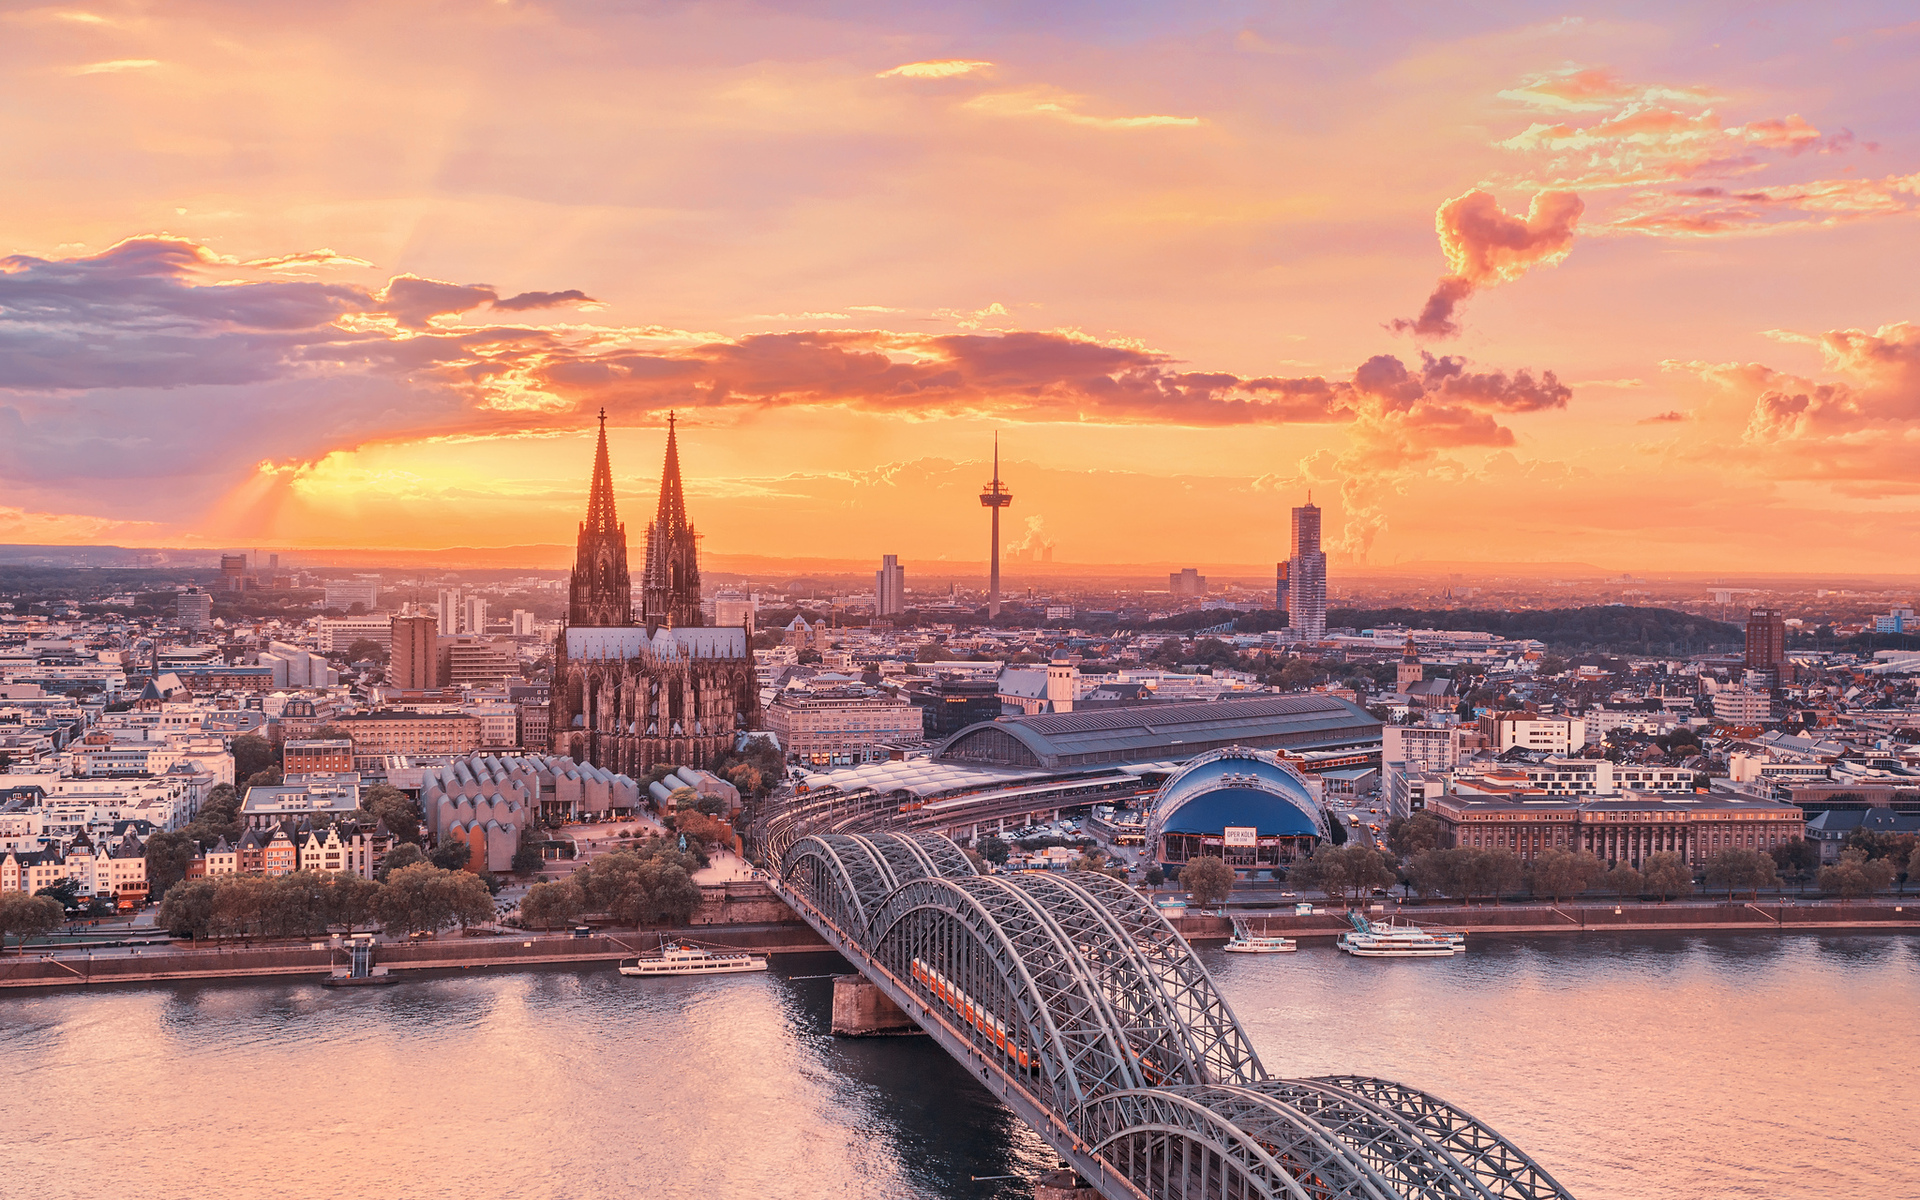 cologne, Germany, Rhine, Architecture, Bridge, Buildings, Church, Cathedral, Cityscape, Sunset, Sunrise, Sky, Clouds, Sun, Sunlight, Colors, Scenic, Photography Wallpaper